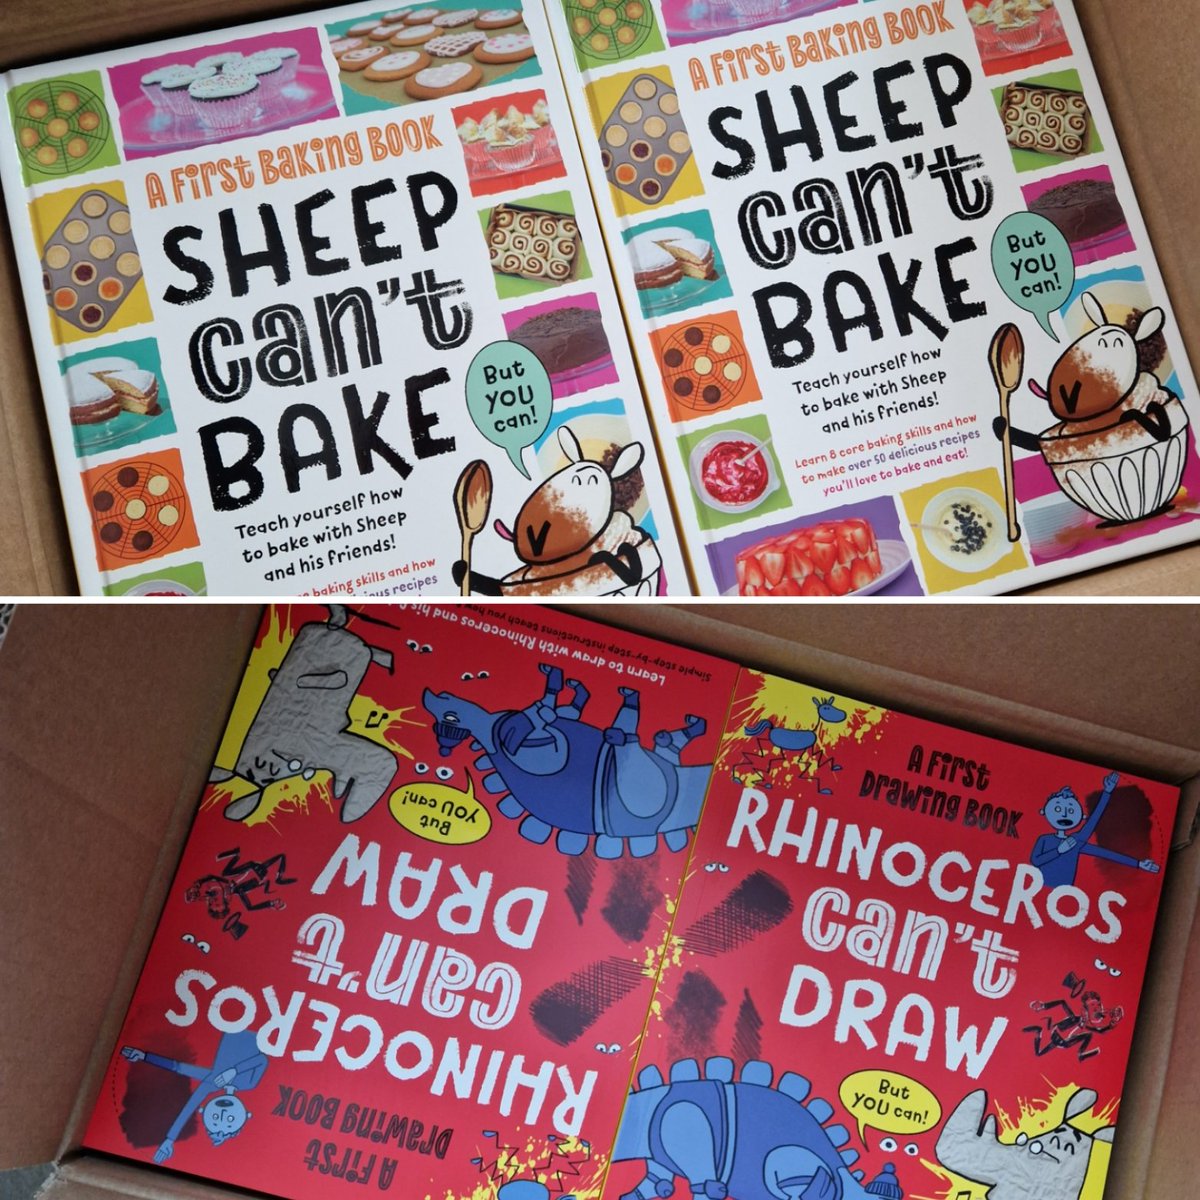 Just love receiving boxes of books from the warehouse ready to send out for reviews! These two fab titles in our Practically Awesome Animals series publish in April! #lovetobake #lovetodraw